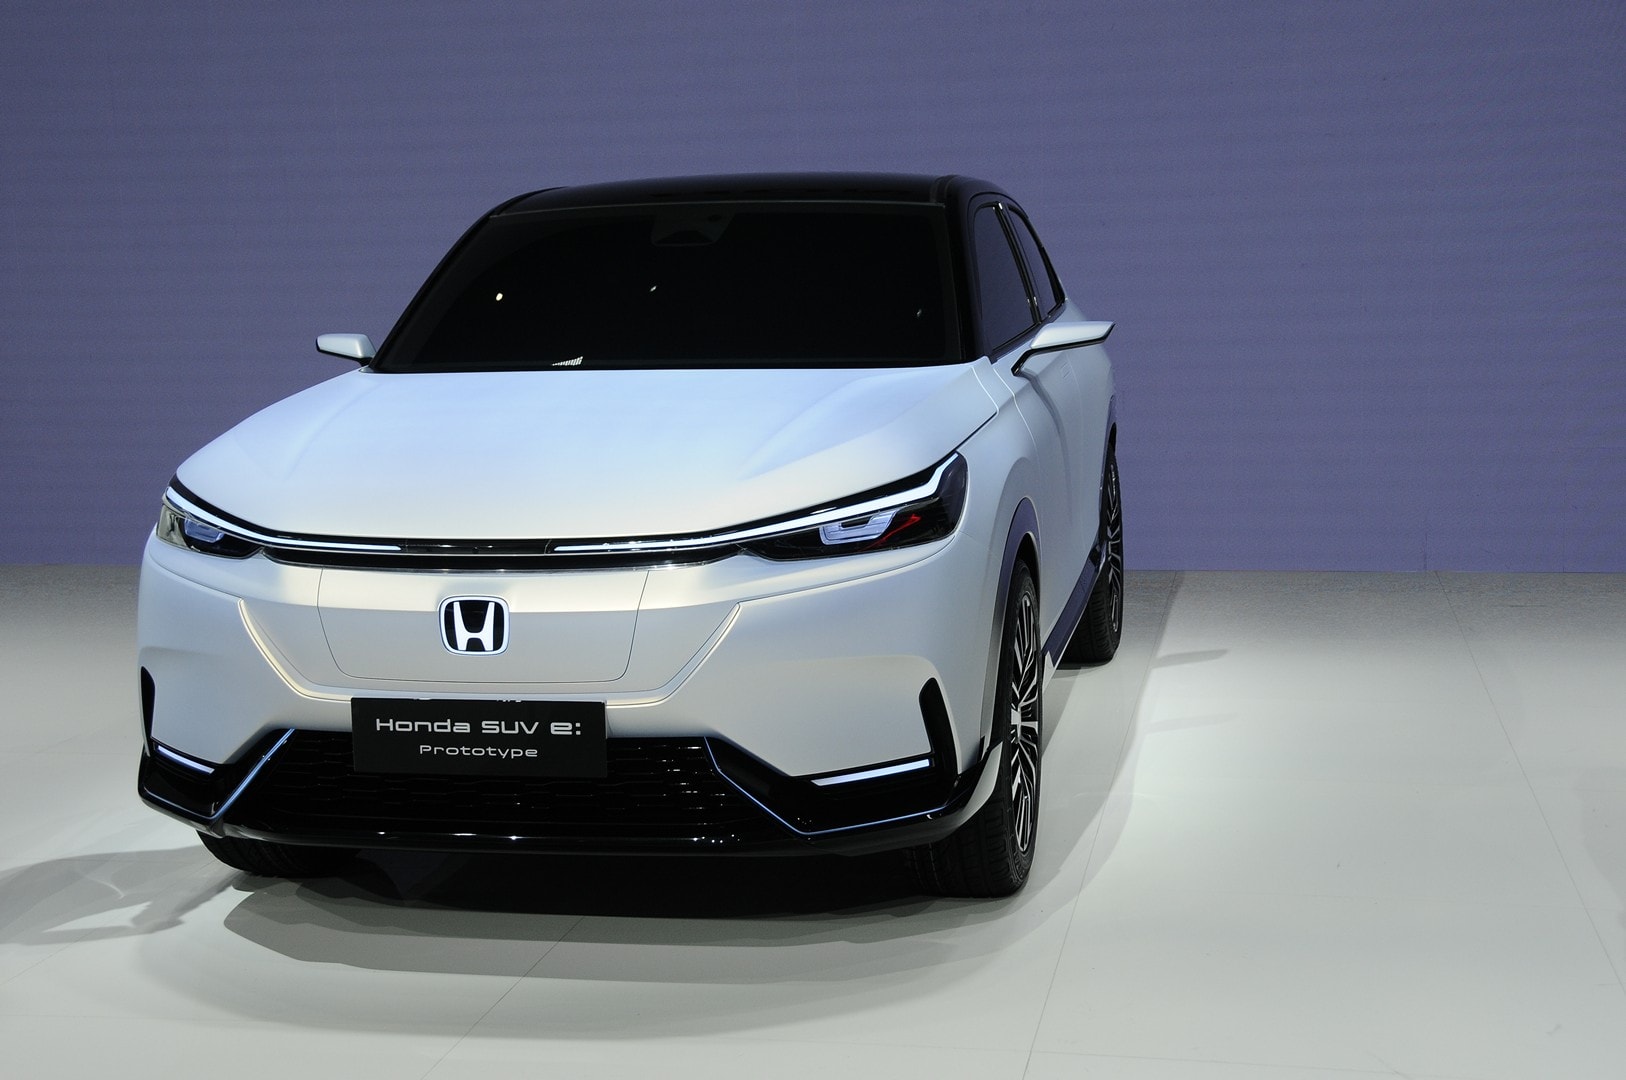 Download Honda Reveals Electric SUV Prototype in China, Looks Like the New HR-V - autoevolution